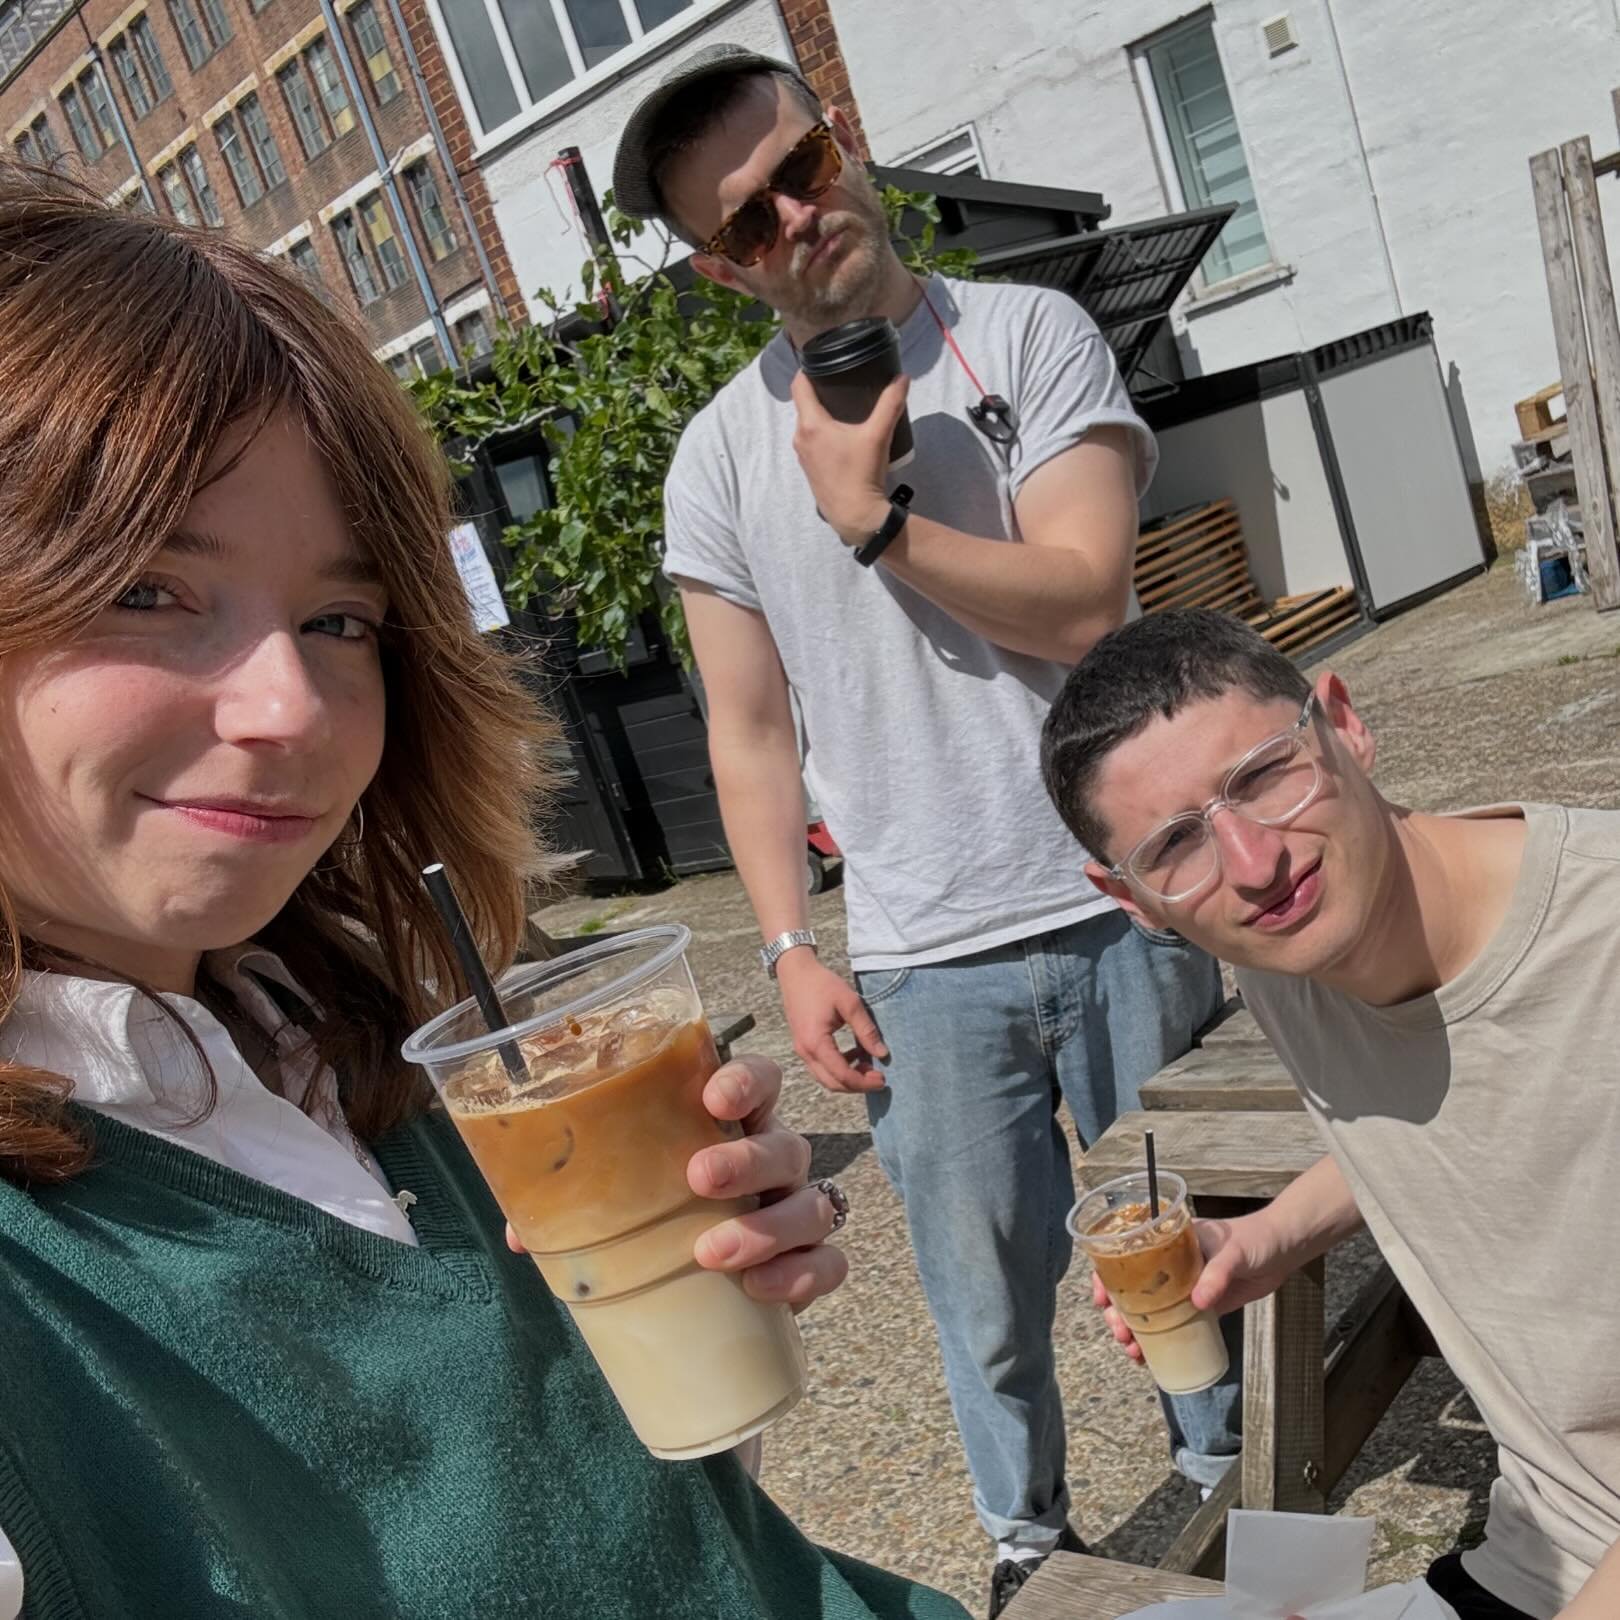 We got our beverage of choice and are avoiding band practice because it&rsquo;s sunny. 😎 ☀️ uh oh.